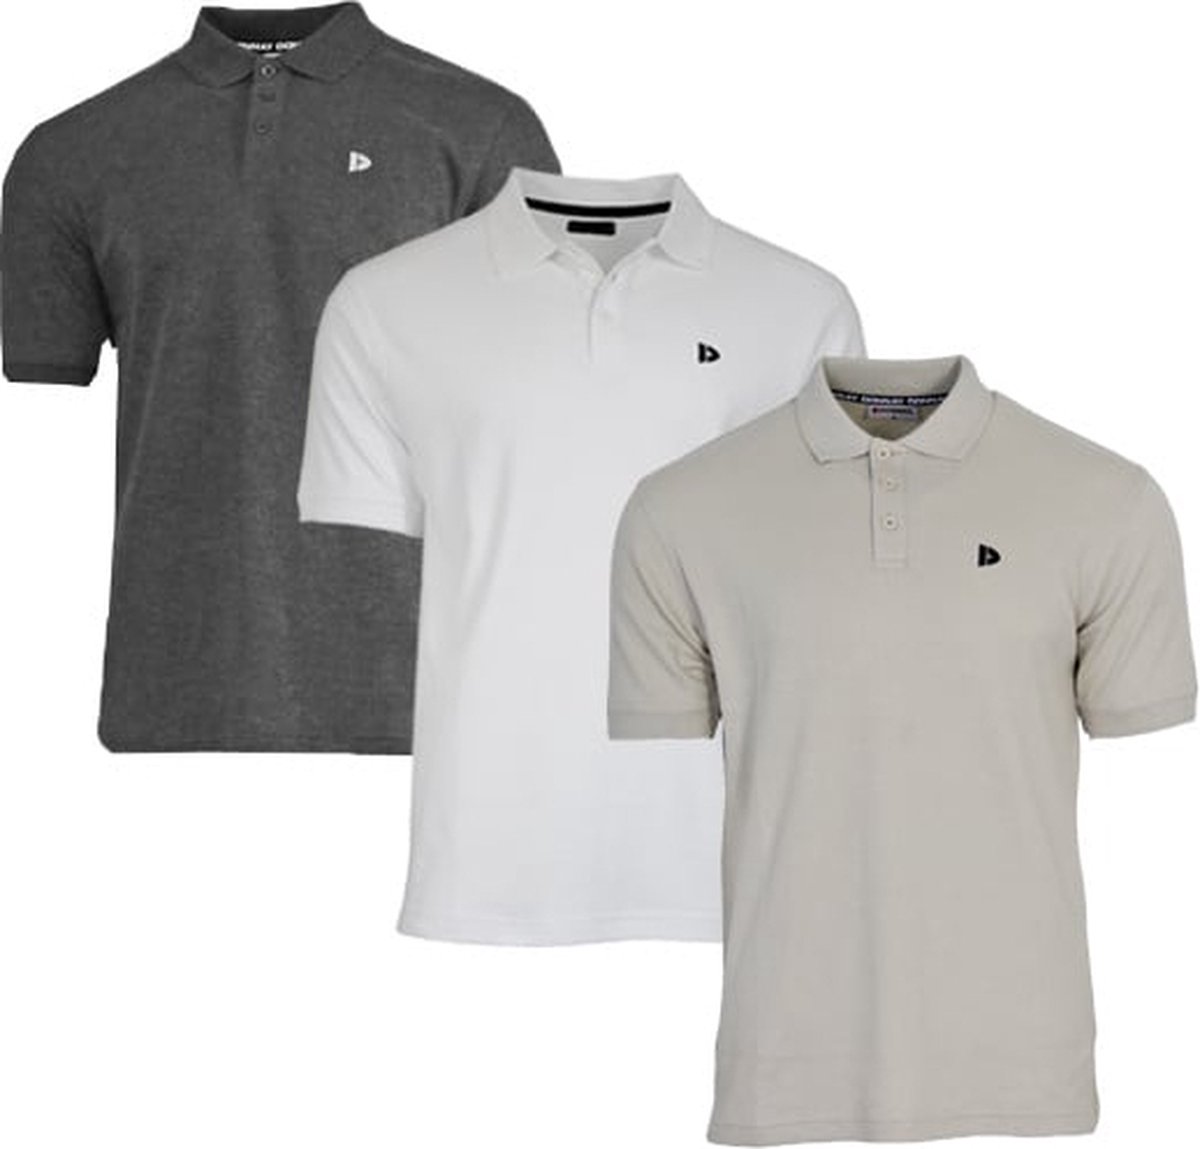 3-Pack Donnay Polo (549009) - Sportpolo - Heren - Charcoal-marl/White/Sand (574) - maat 3XL